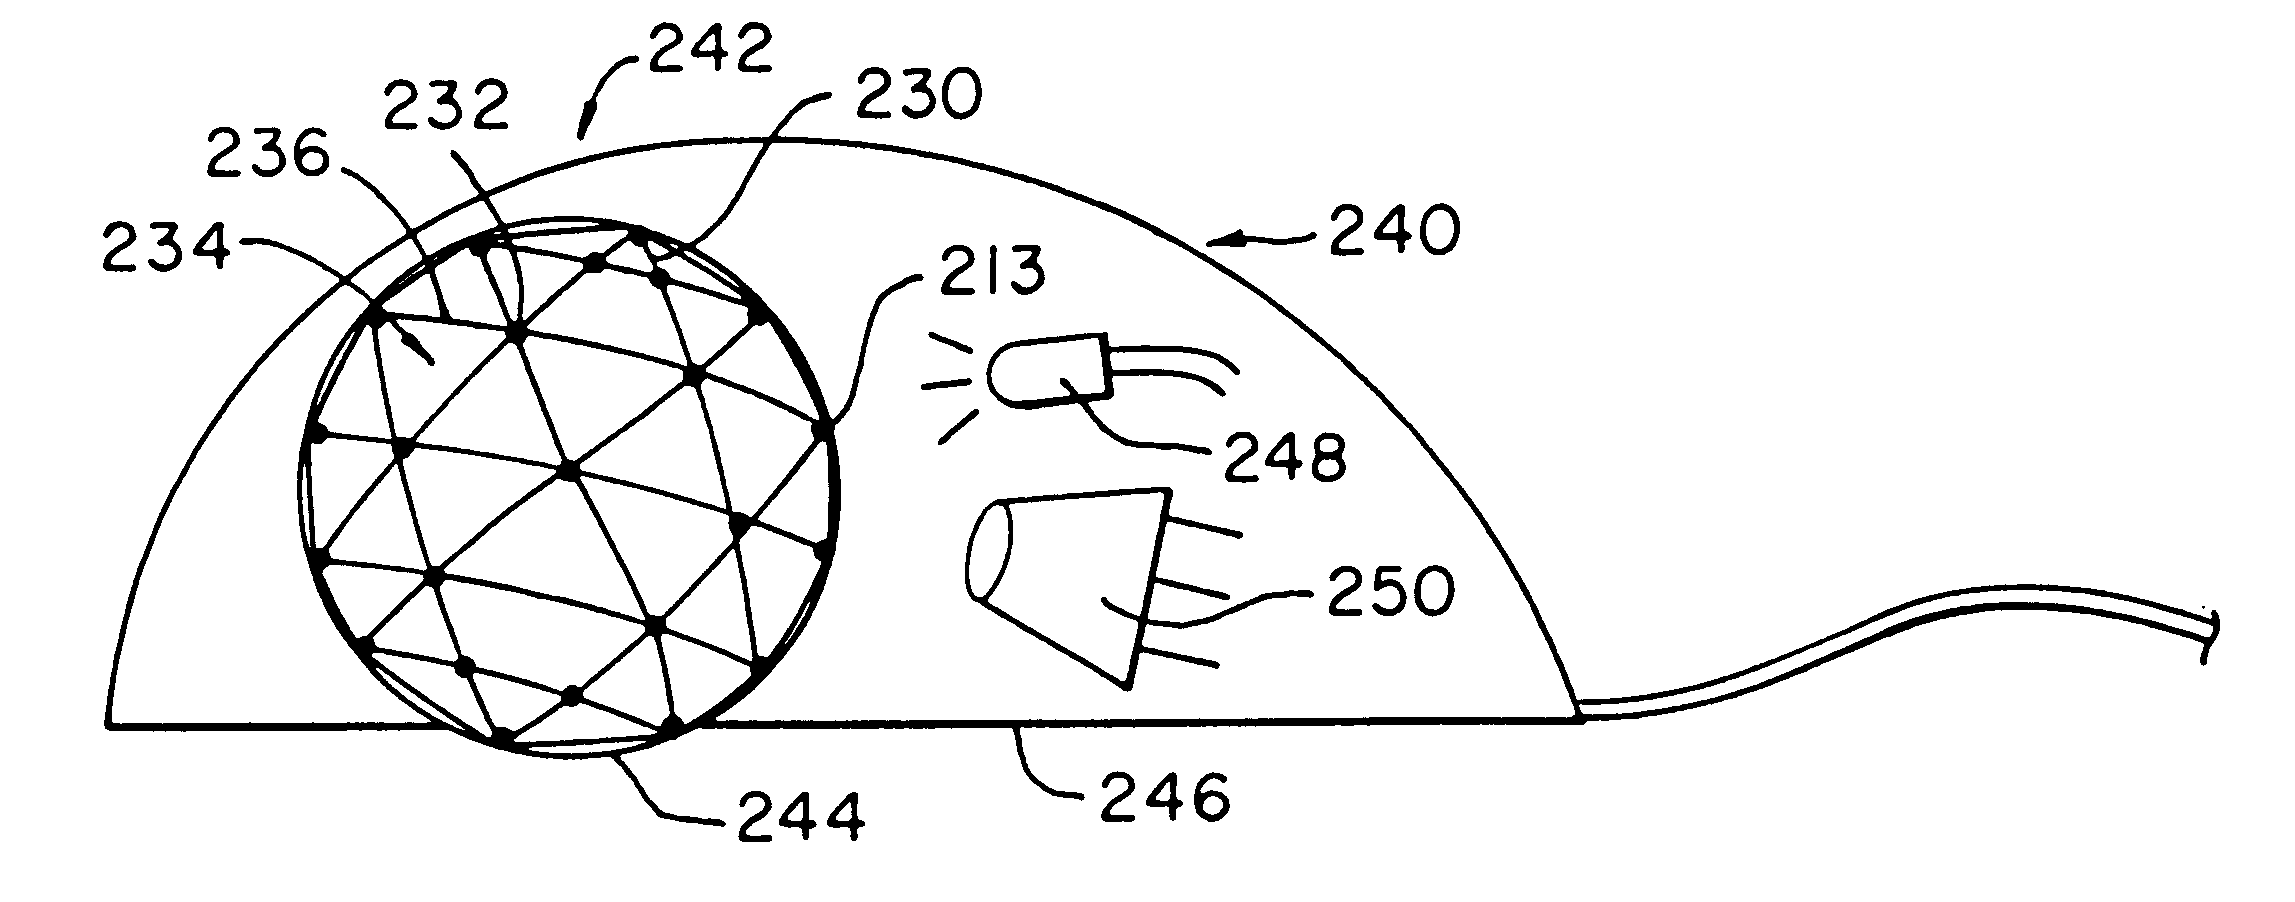 Mouse and trackball with optimal measurement optics